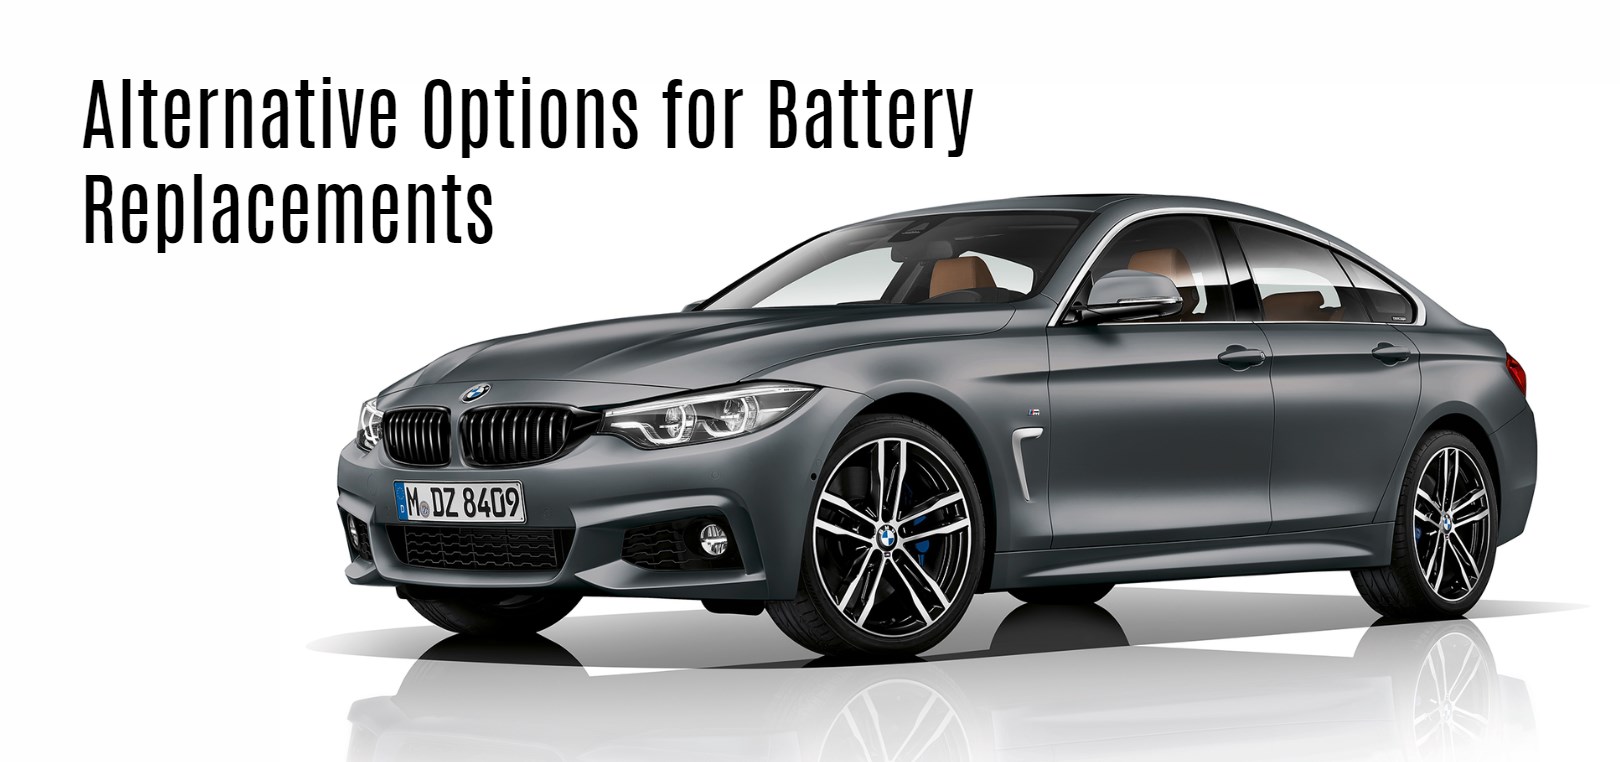 Alternative Options for Battery Replacements